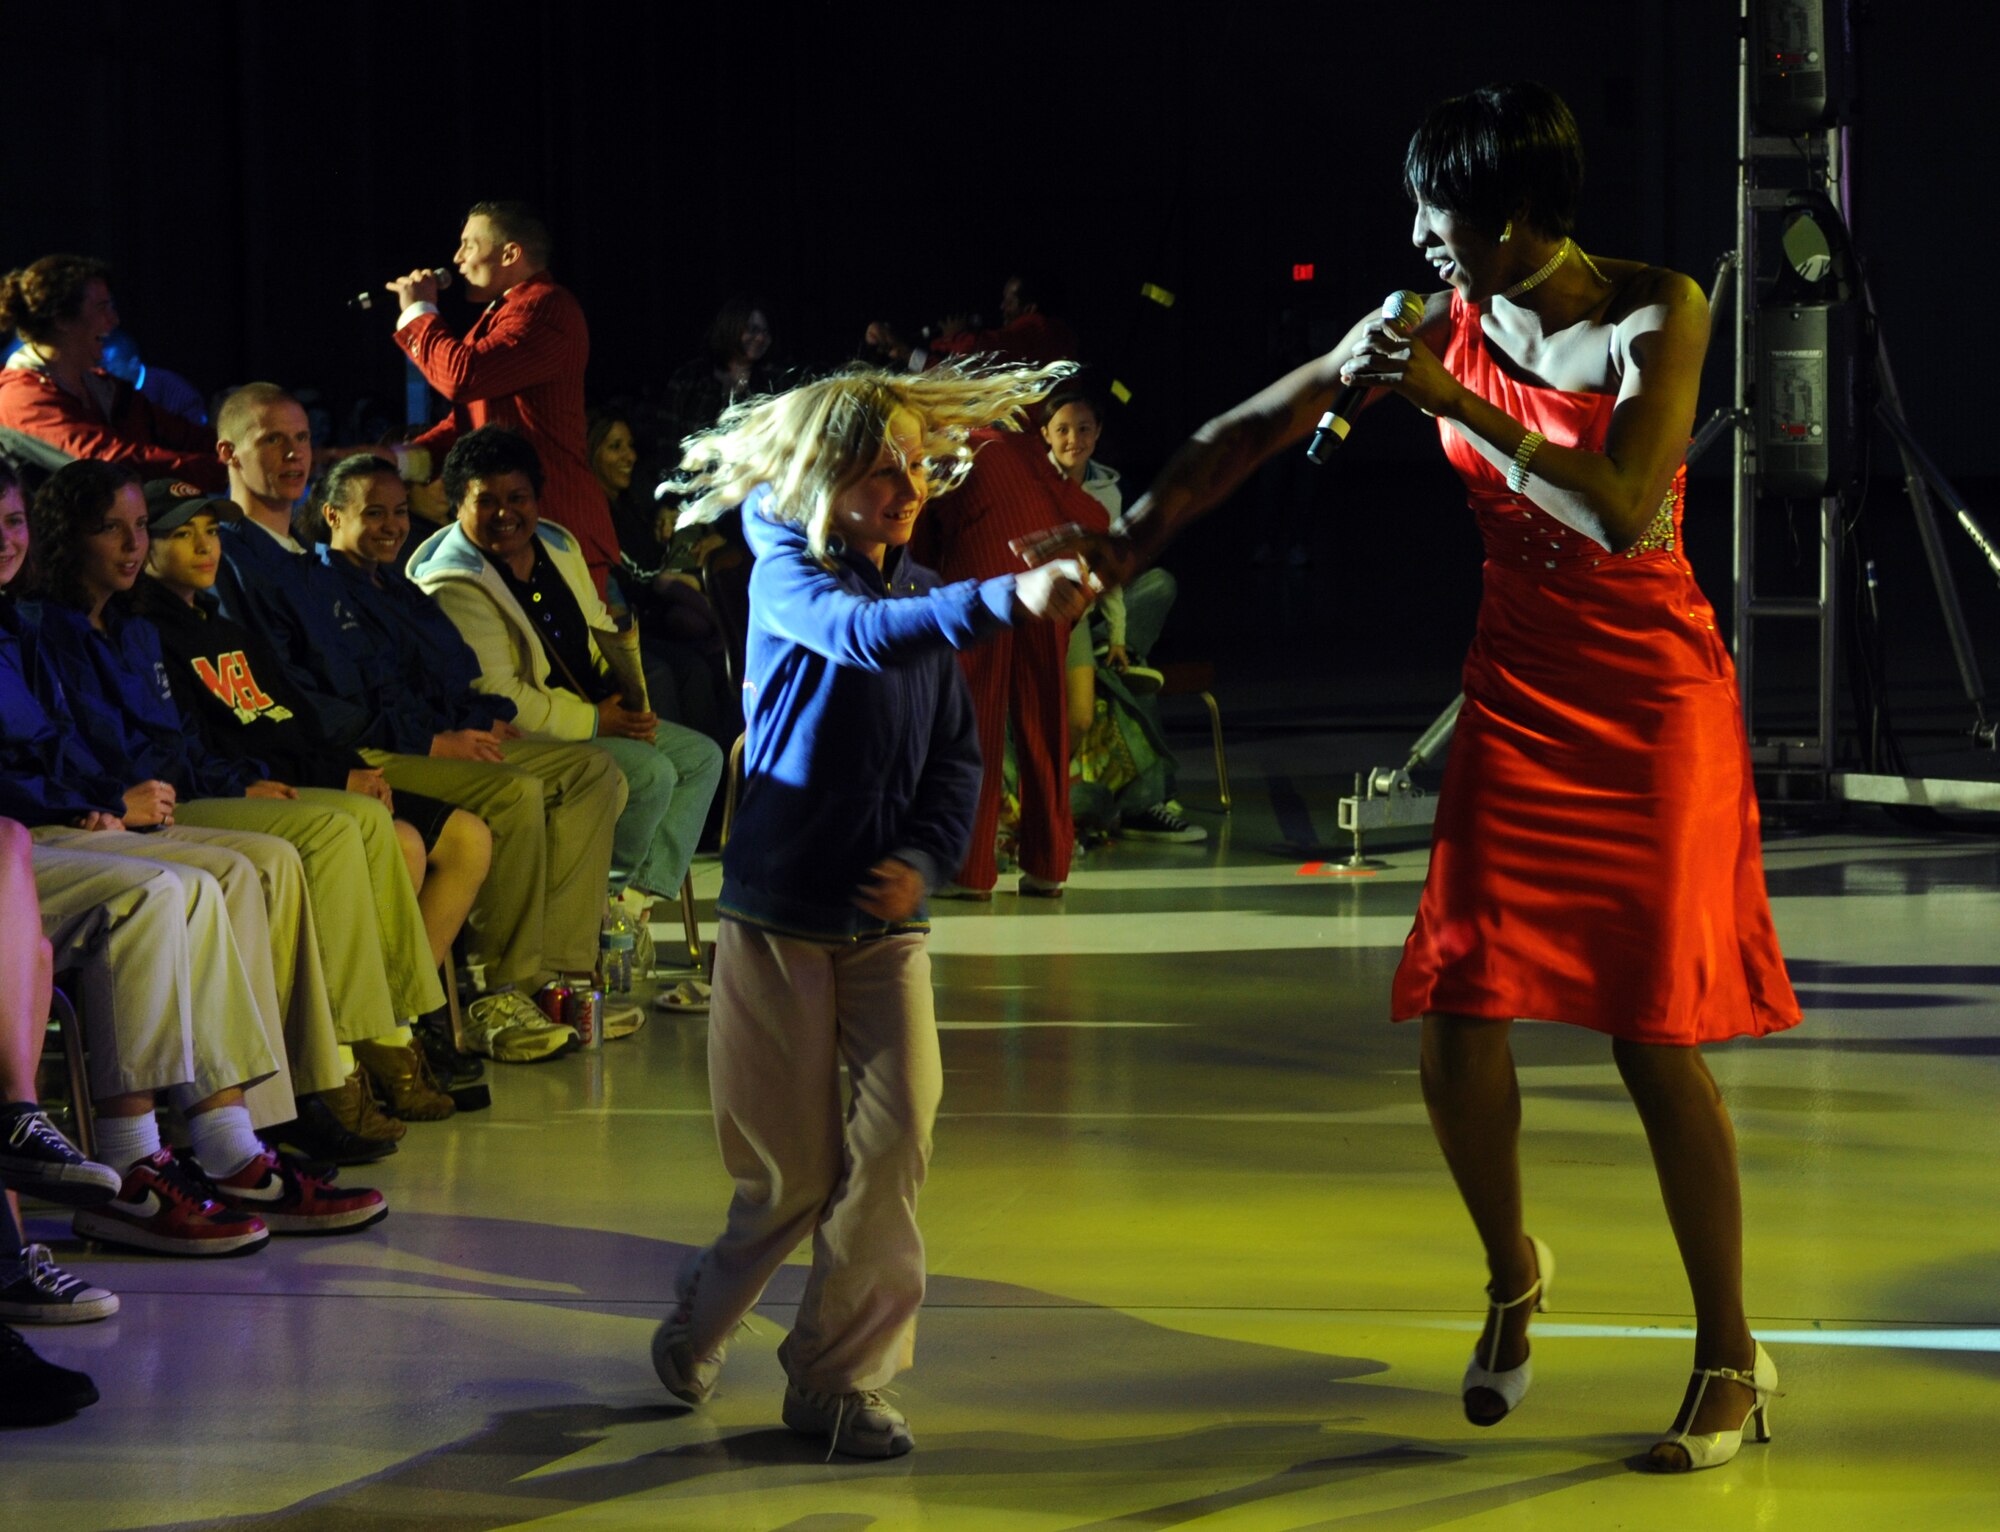 MOUNTAIN HOME AIR FORCE BASE, Idaho – Senior Airman Kristina Overton, 341st Missile Wing public affairs journeyman, dances with a member of the crowd during the Tops in Blue performance in hangar 1331, June 18. Tops in Blue is one of the oldest and most widely traveled entertainment groups of its kind and is composed of 35 to 40 talented vocalists, musicians, dancers and technicians. Their primary purpose is to perform for military personnel and their families throughout the world. (U.S. Air Force photo by Senior Airman Debbie Lockhart)